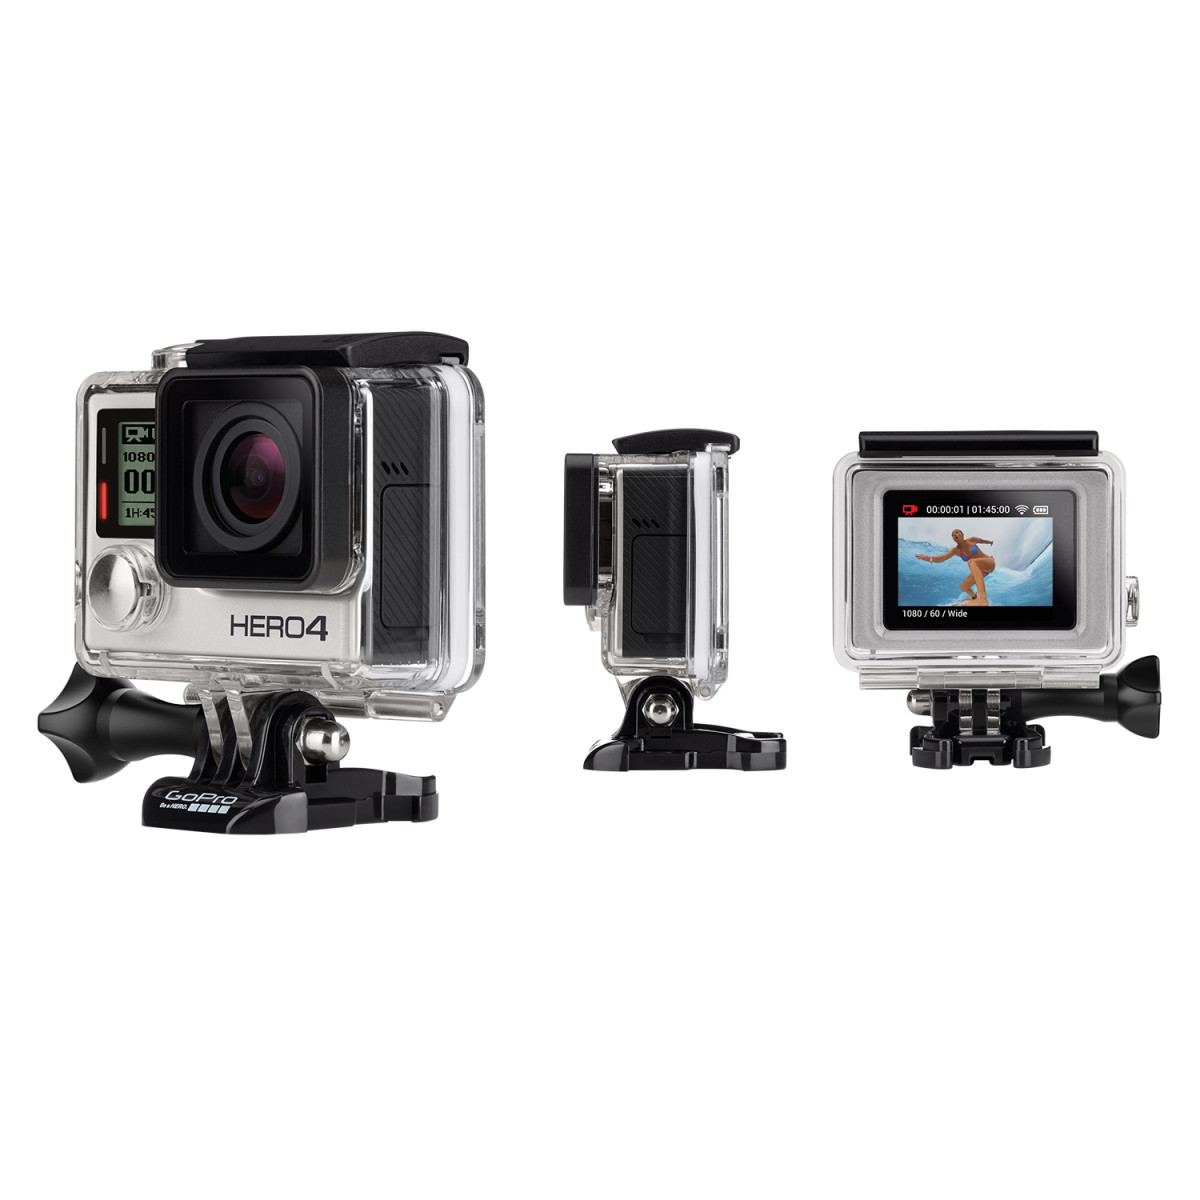 New Action Cameras At Best Buy #GoProatBestBuy 